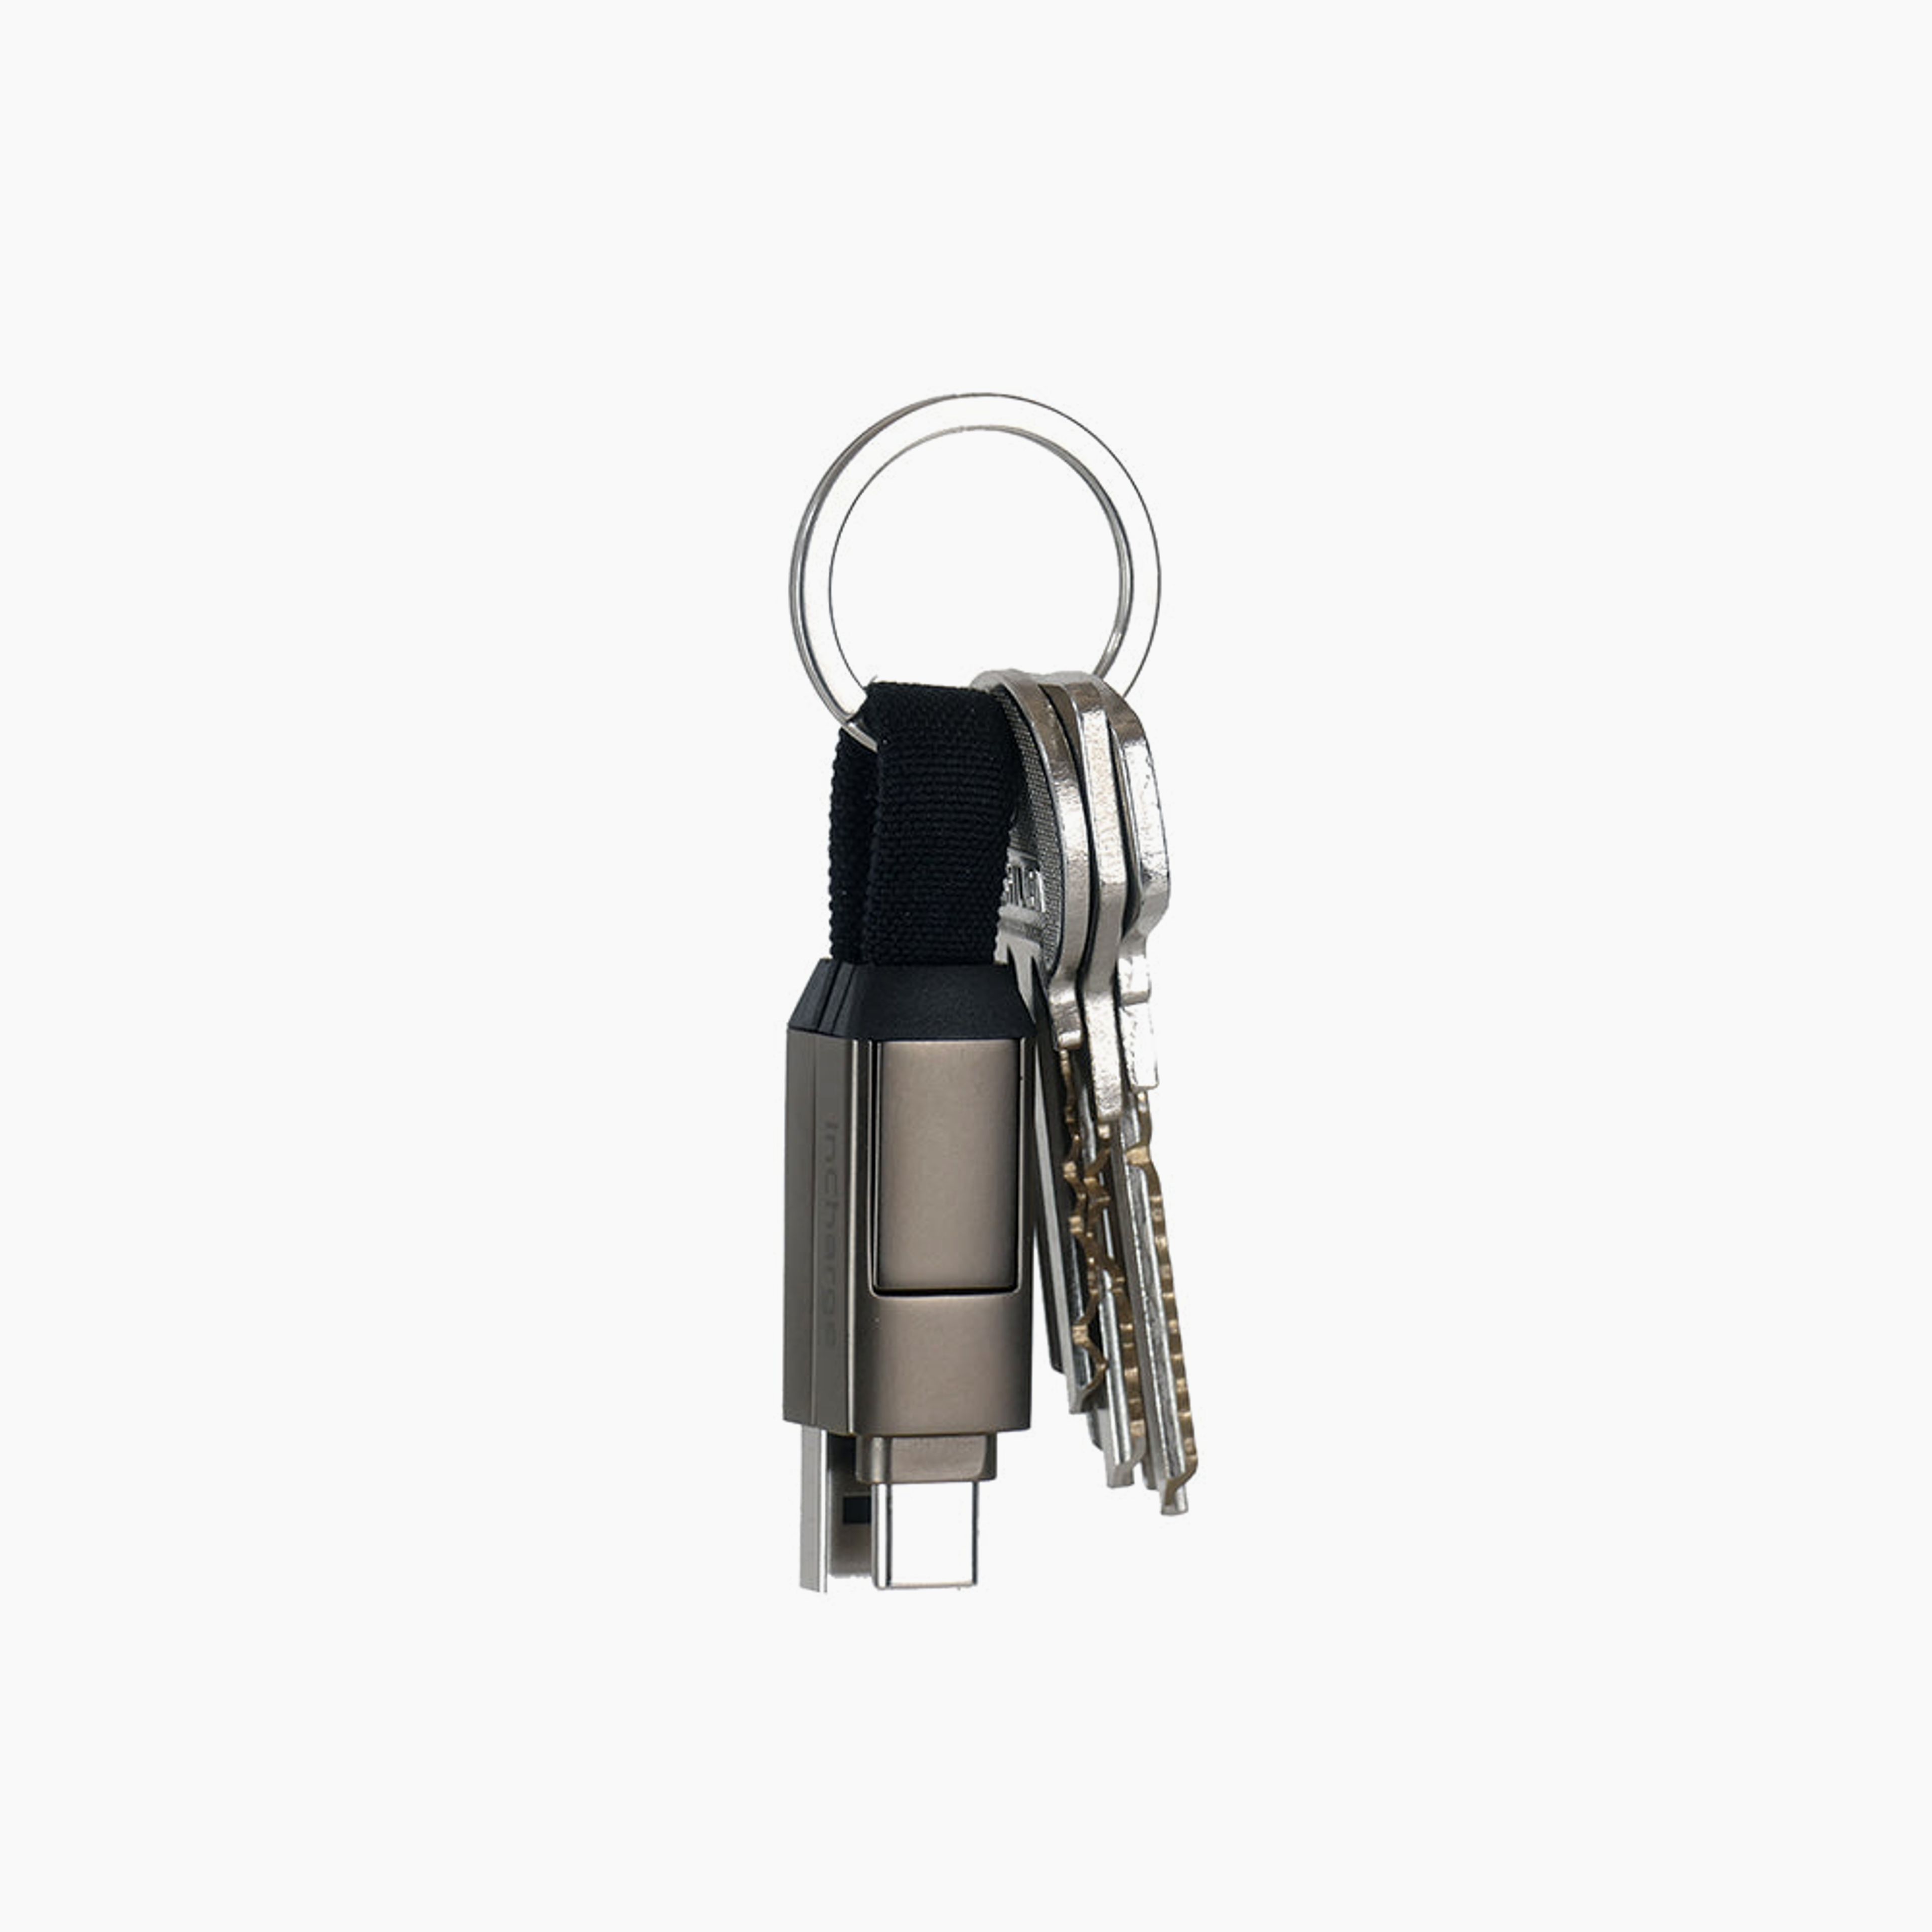 inCharge 6 - 15W, 6in1 keyring cable